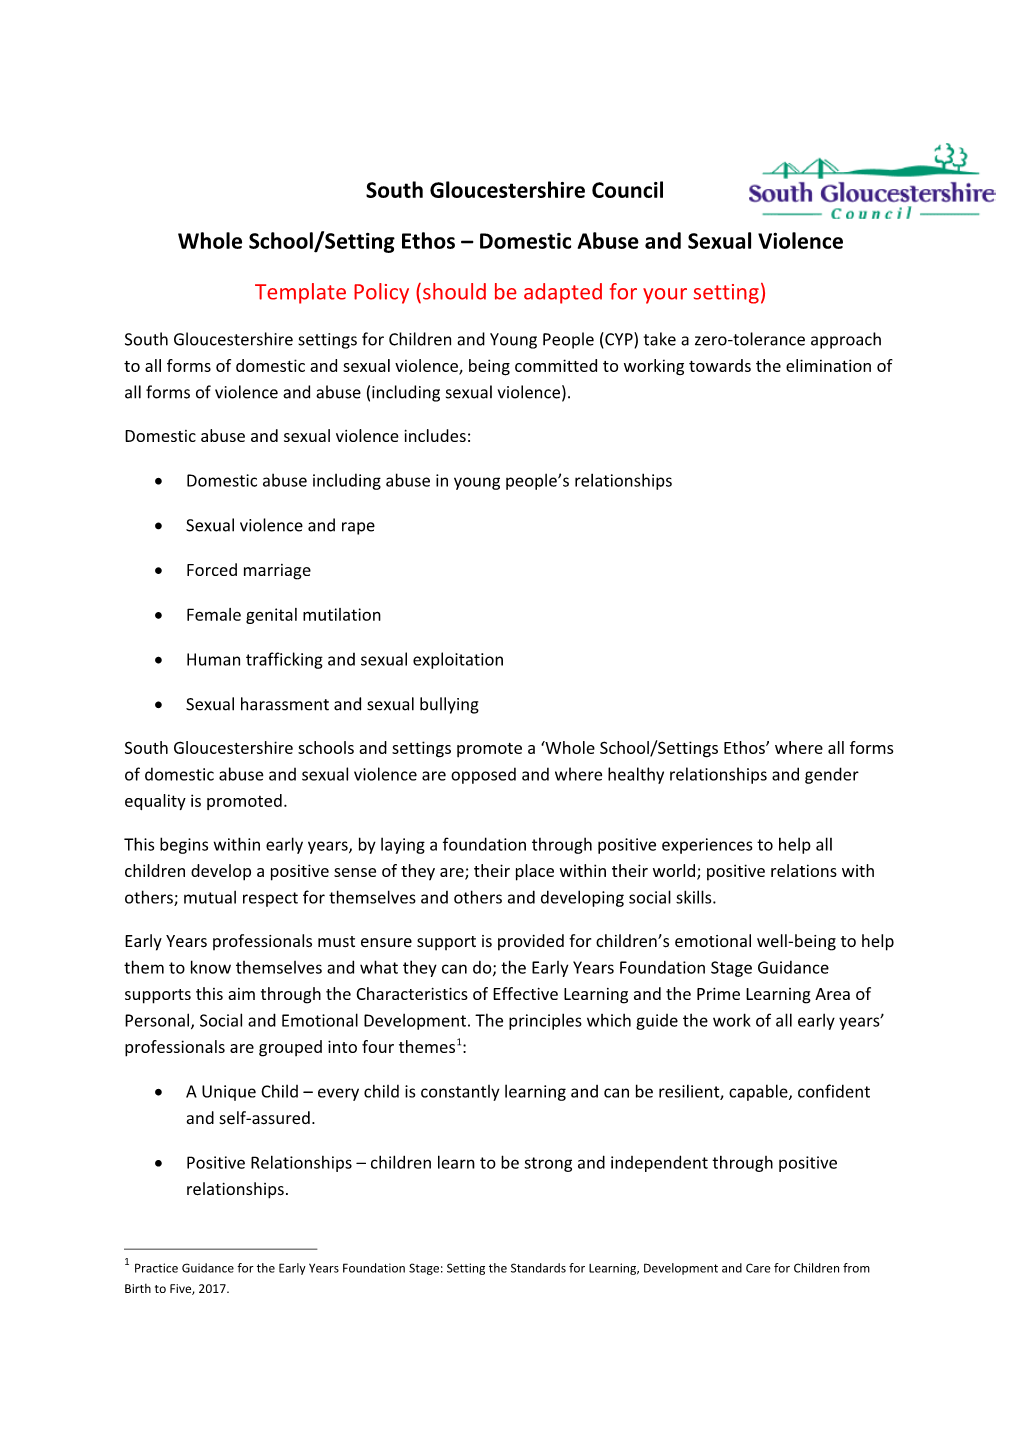 Whole School/Setting Ethos Domestic Abuse and Sexual Violence